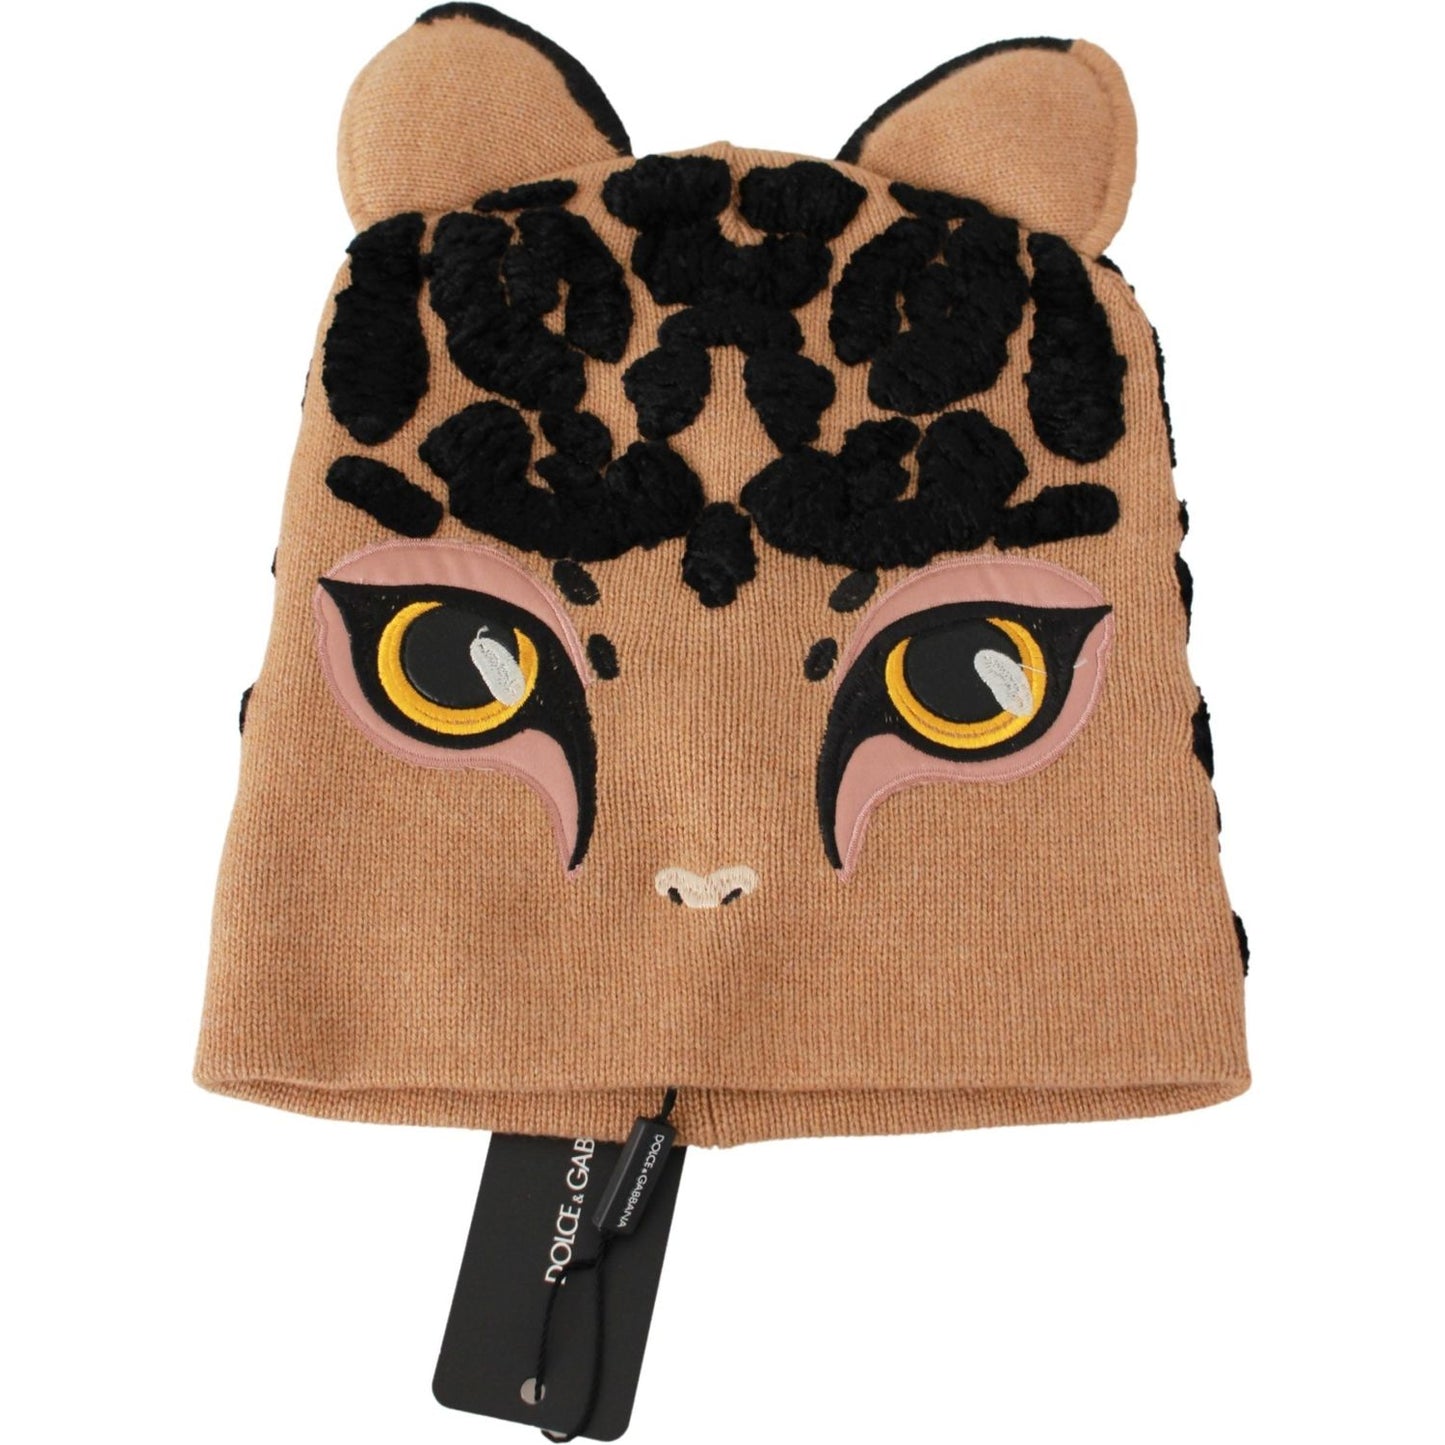 Dolce & Gabbana Elegant Cashmere Blend Embroidered Beanie Beanie Hat brown-cats-eye-embroidered-beanie-cashmere-hat IMG_7425-scaled-7d7b99f3-20e.jpg